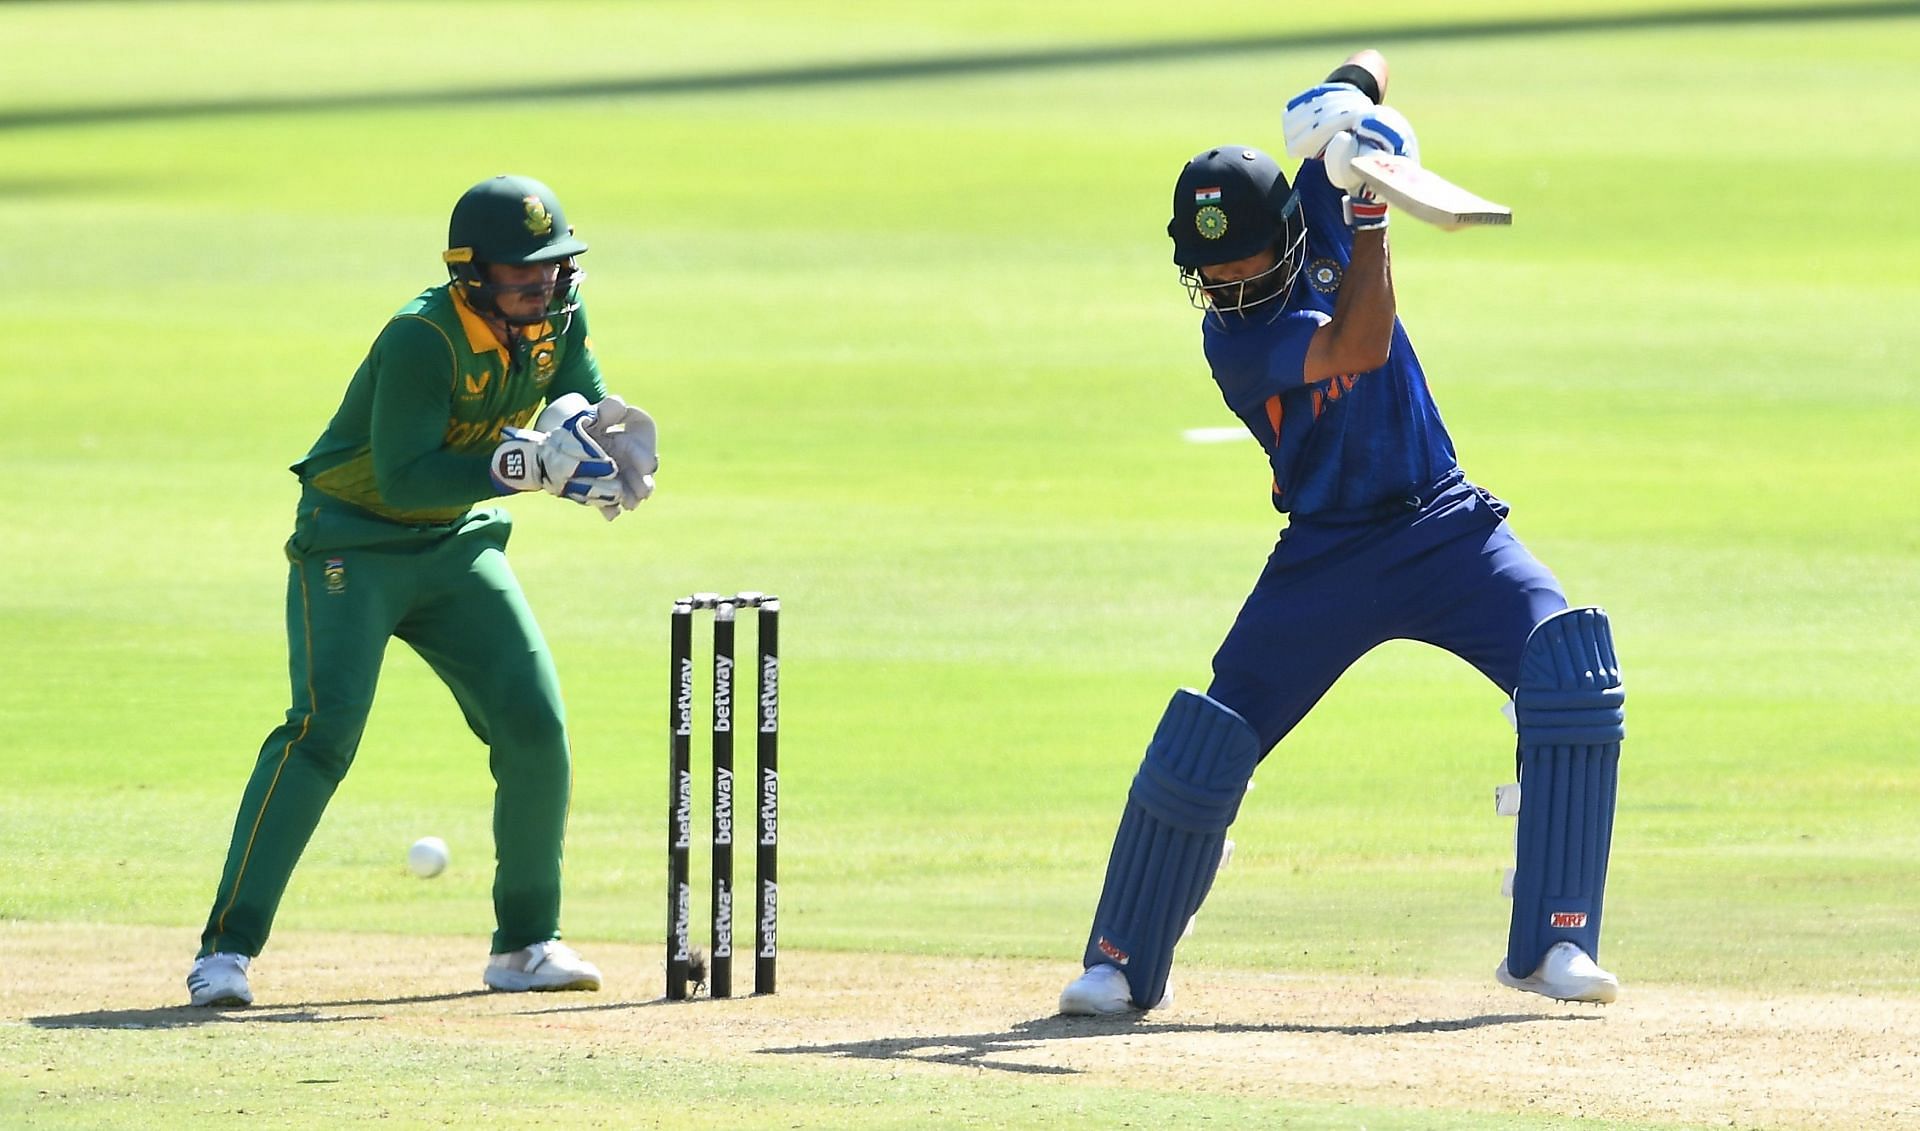 He scored two fifties against South Africa. Pic: Getty Images